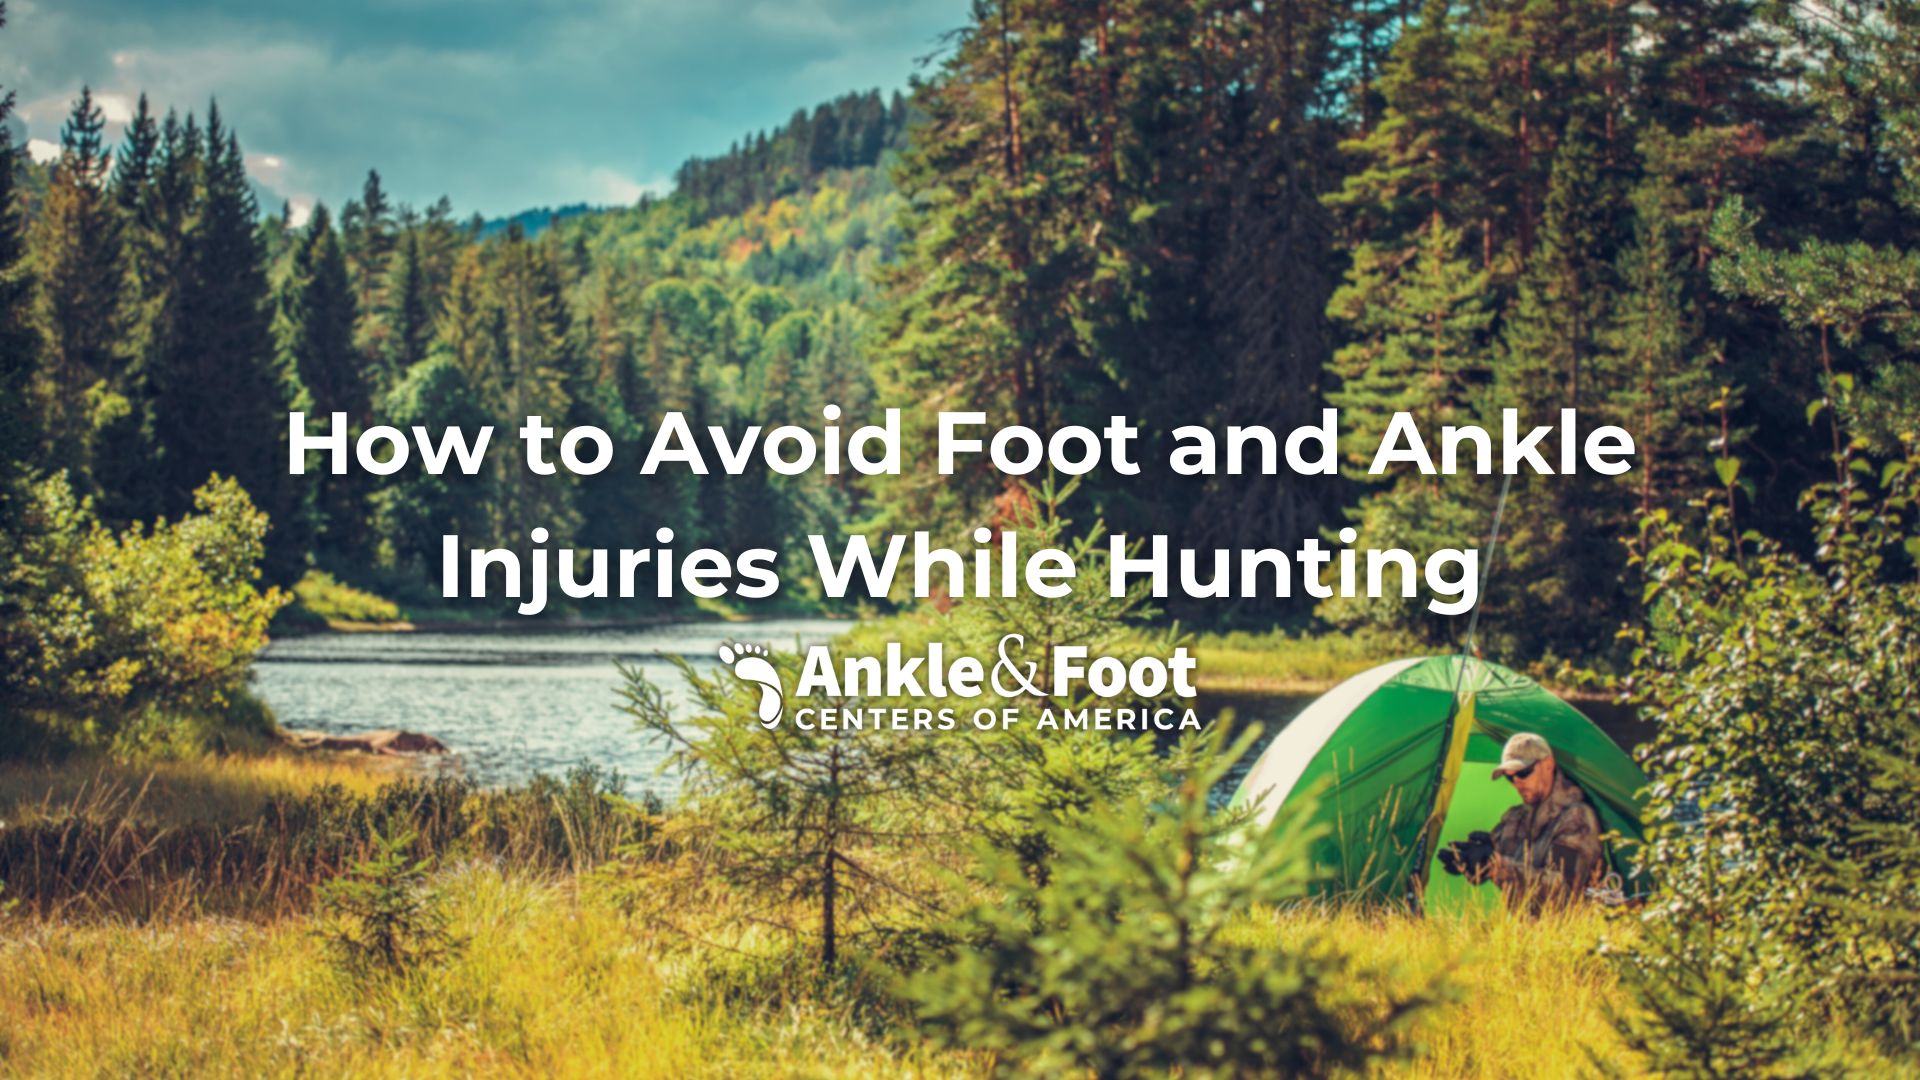 How to Avoid Foot and Ankle Injuries While Hunting